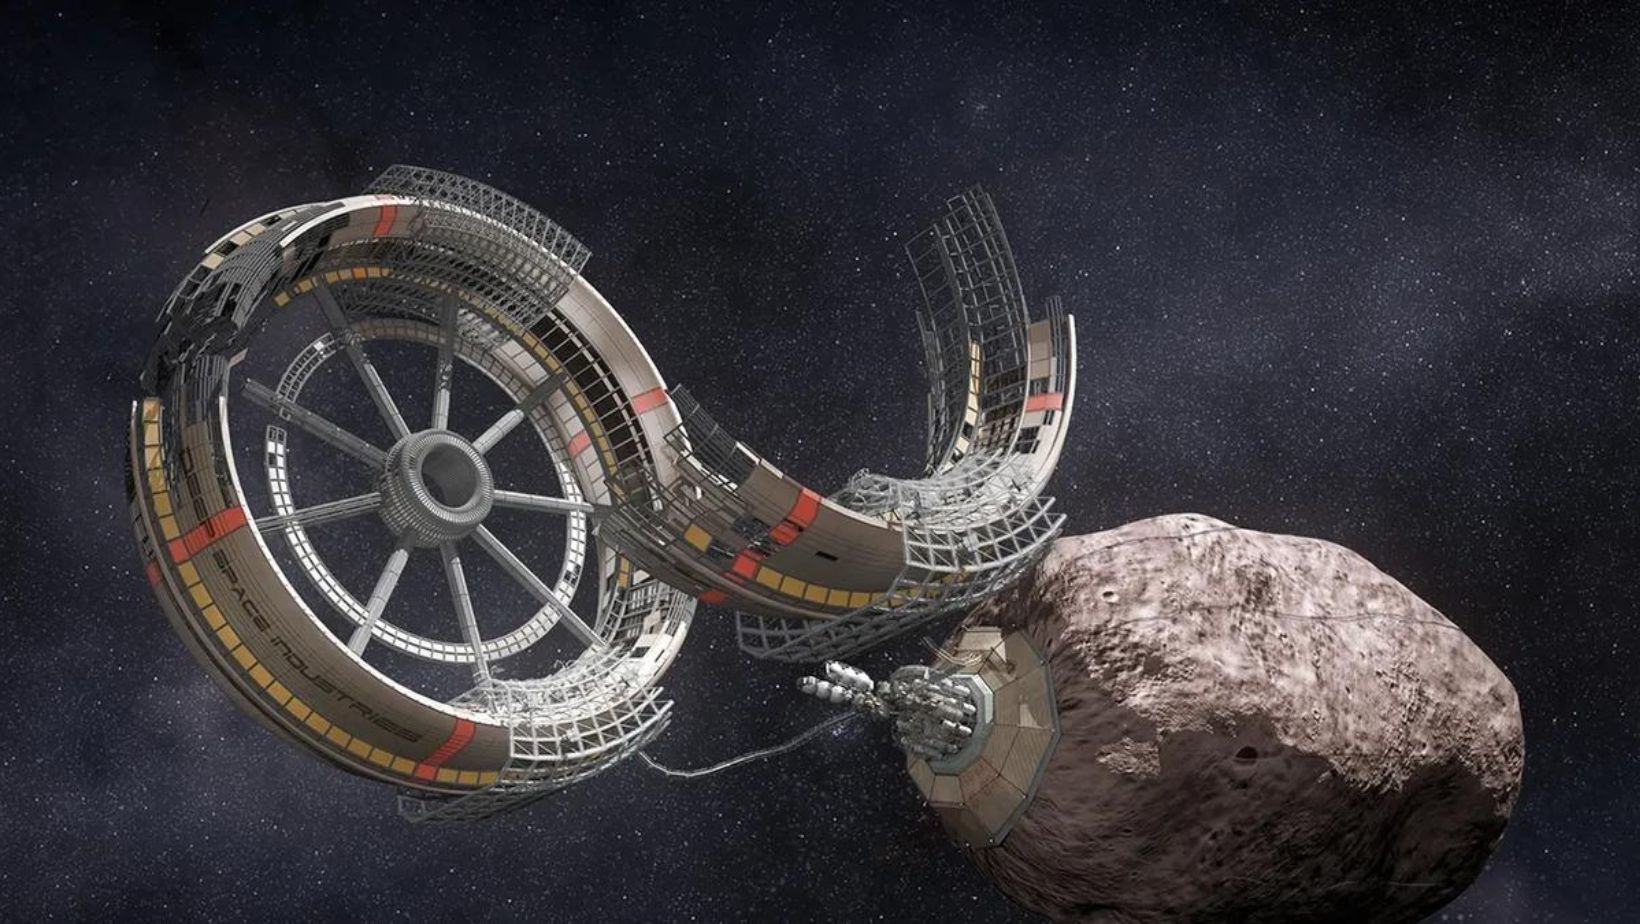 What Are the Potential Benefits of Asteroid Mining?